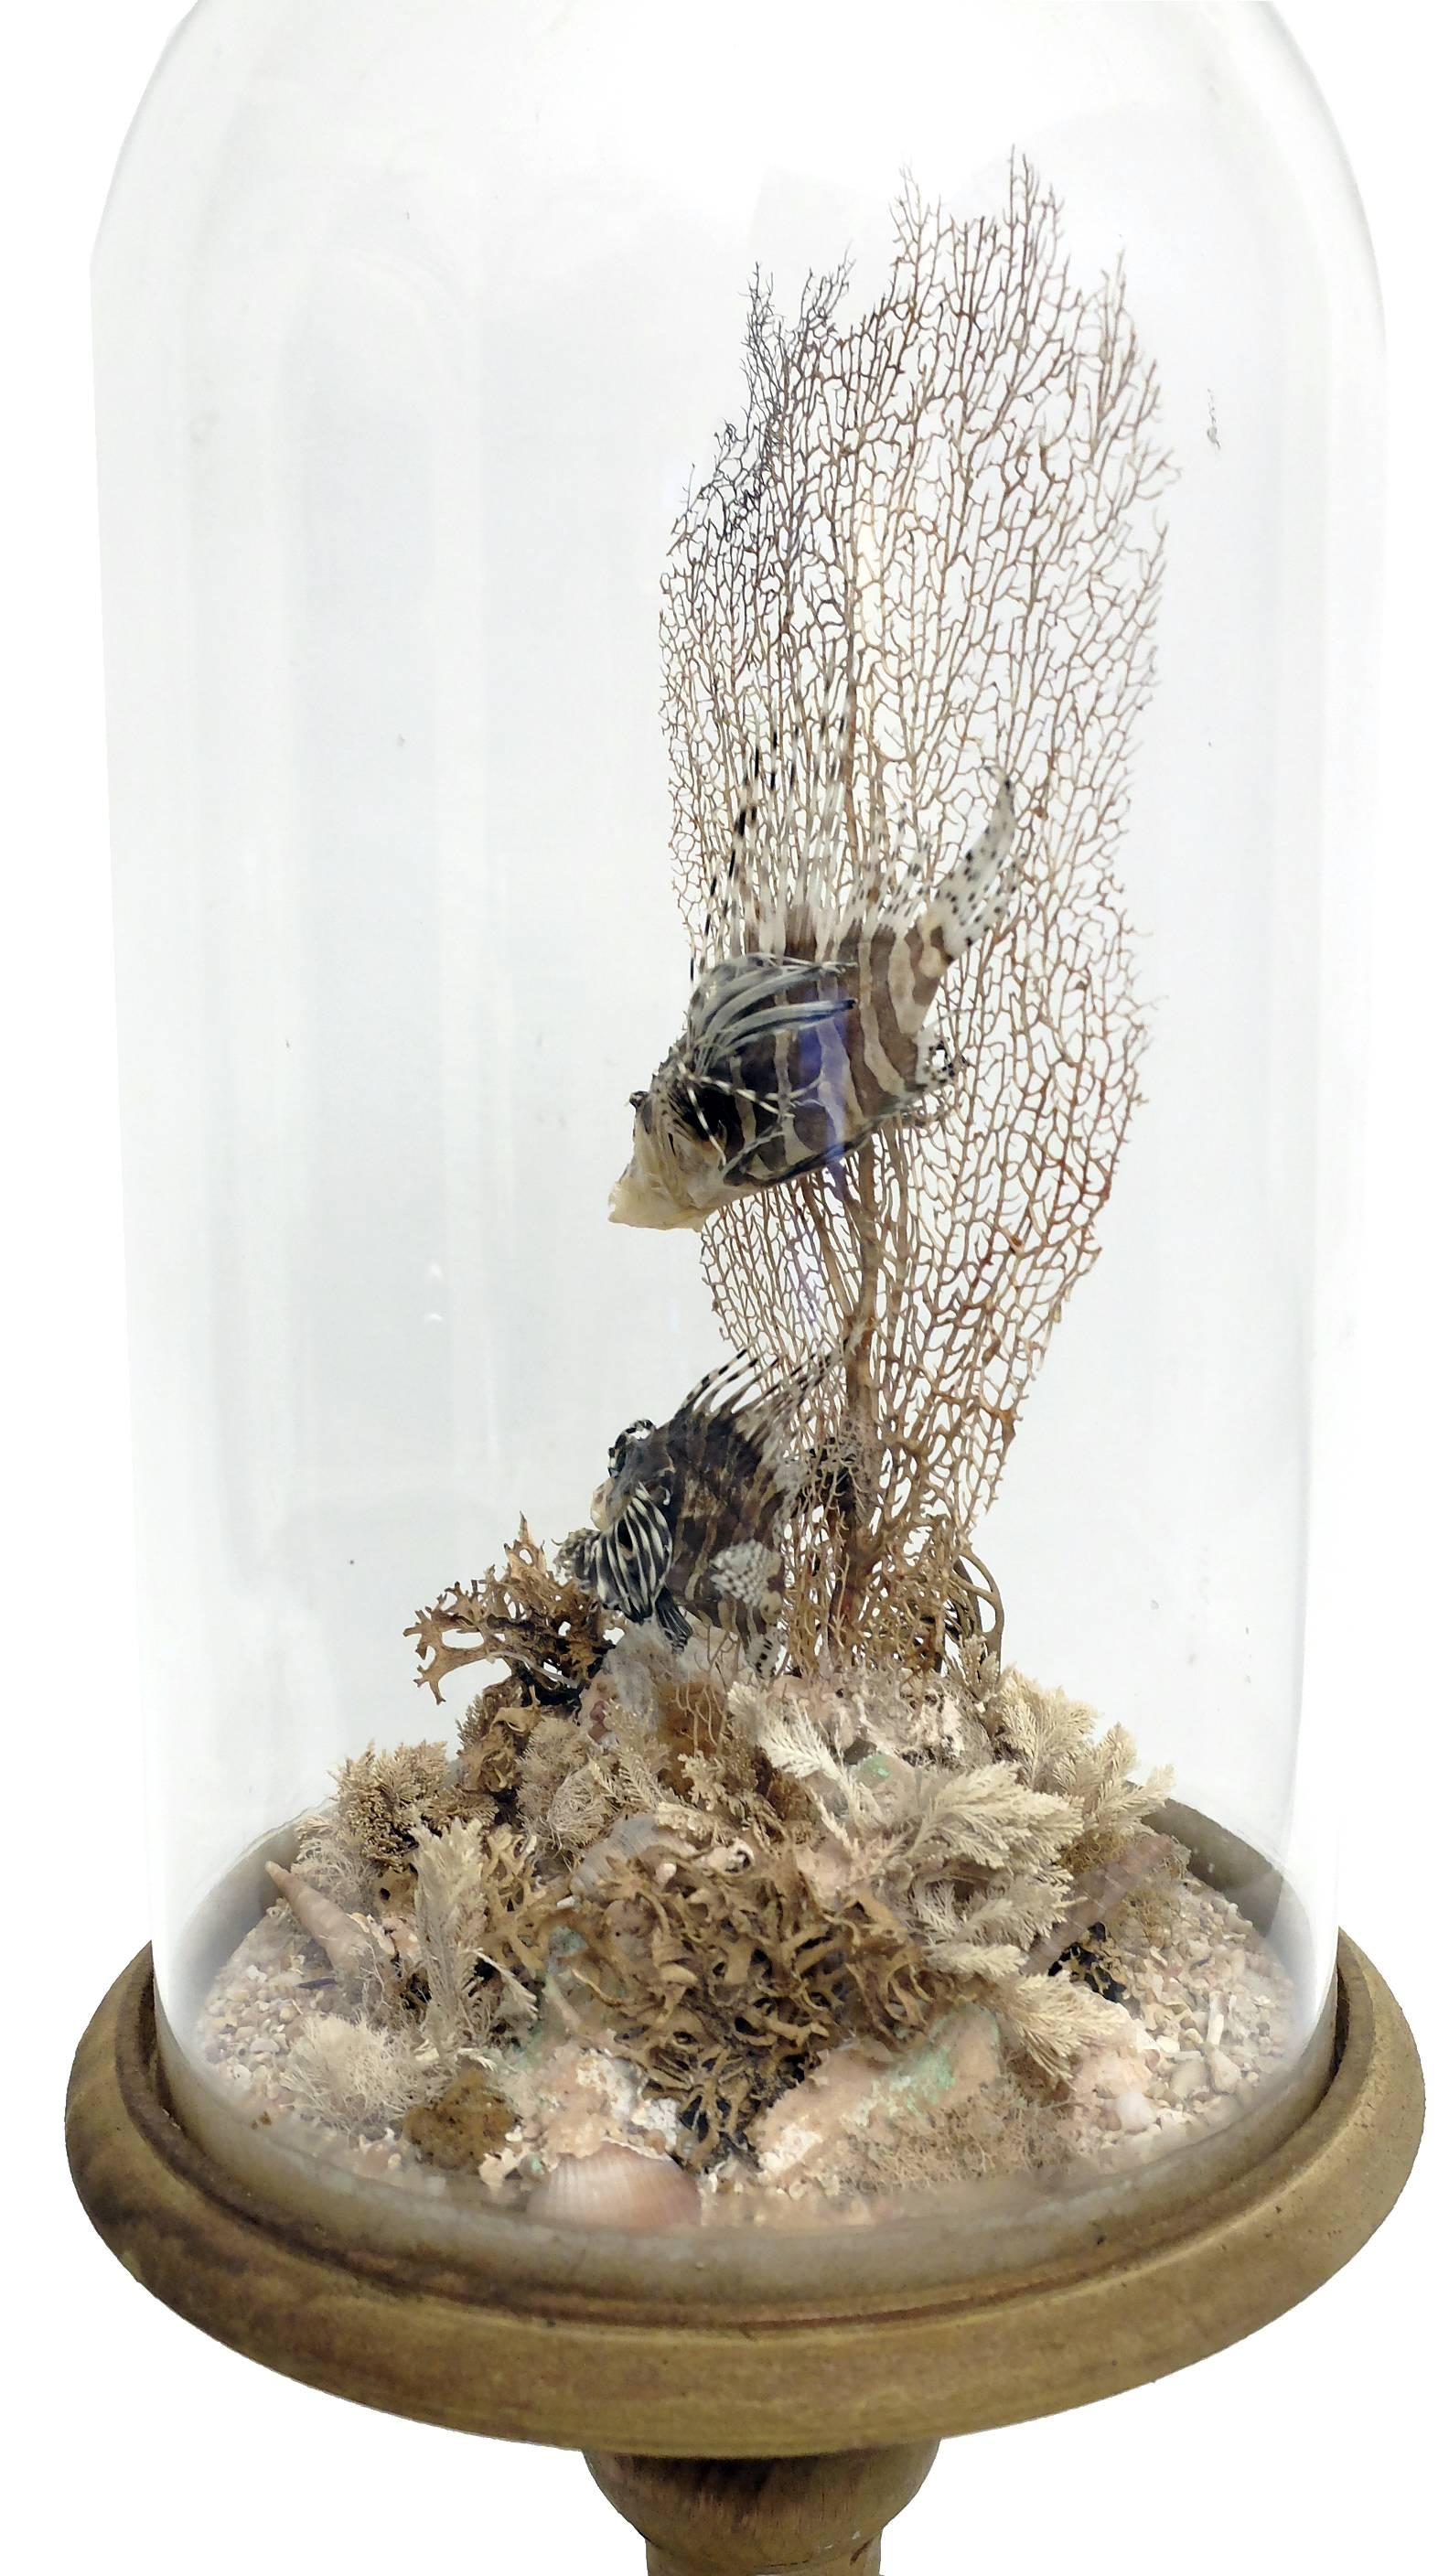 A rare natural Wunderkammer specimen a marine diorama with two decoy fishes Pterois Volitans, a brunch, fan shaped, of horny coral, starfish and reef. The specimens are mounted inside a glass dome, over a gray painted wooden base.